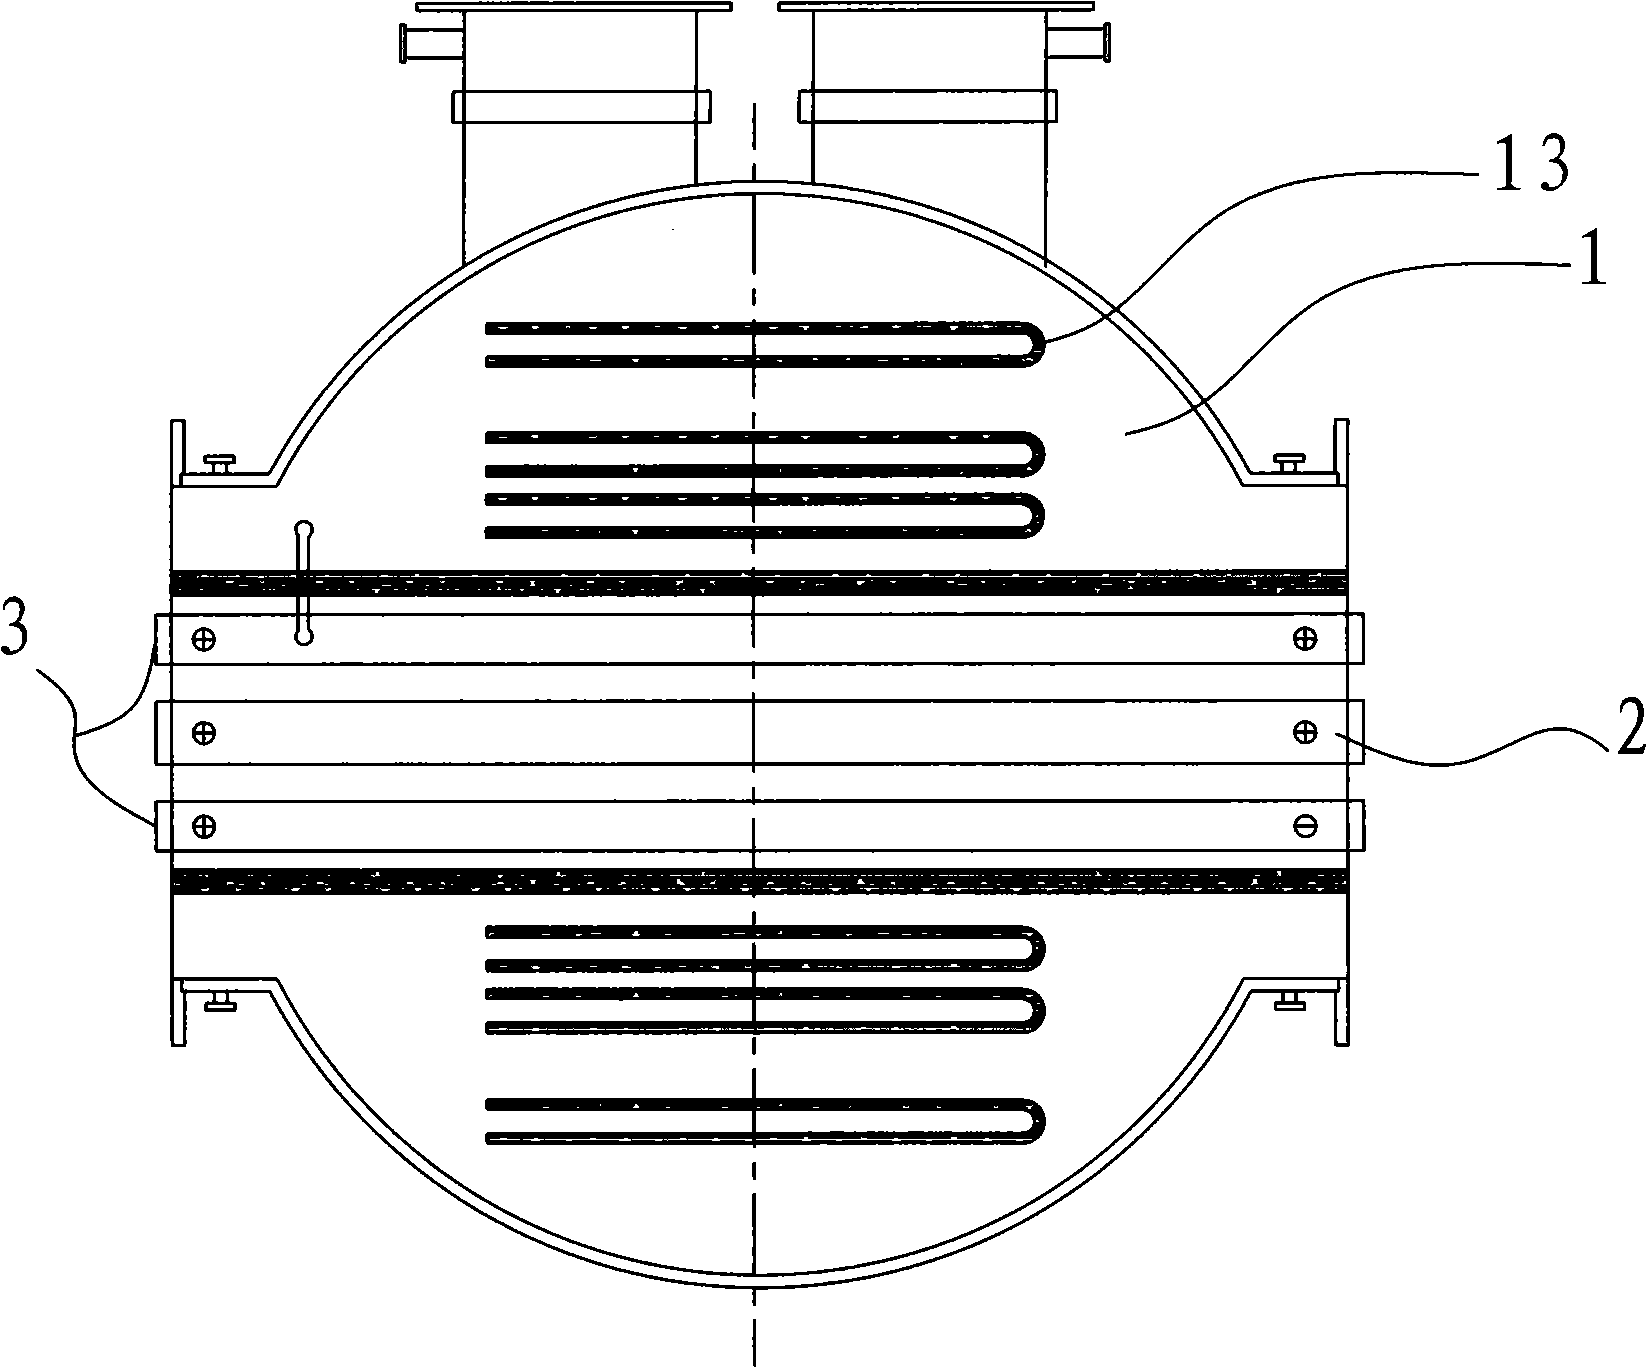 Mid-frequency direct current compound magnetron sputtering device